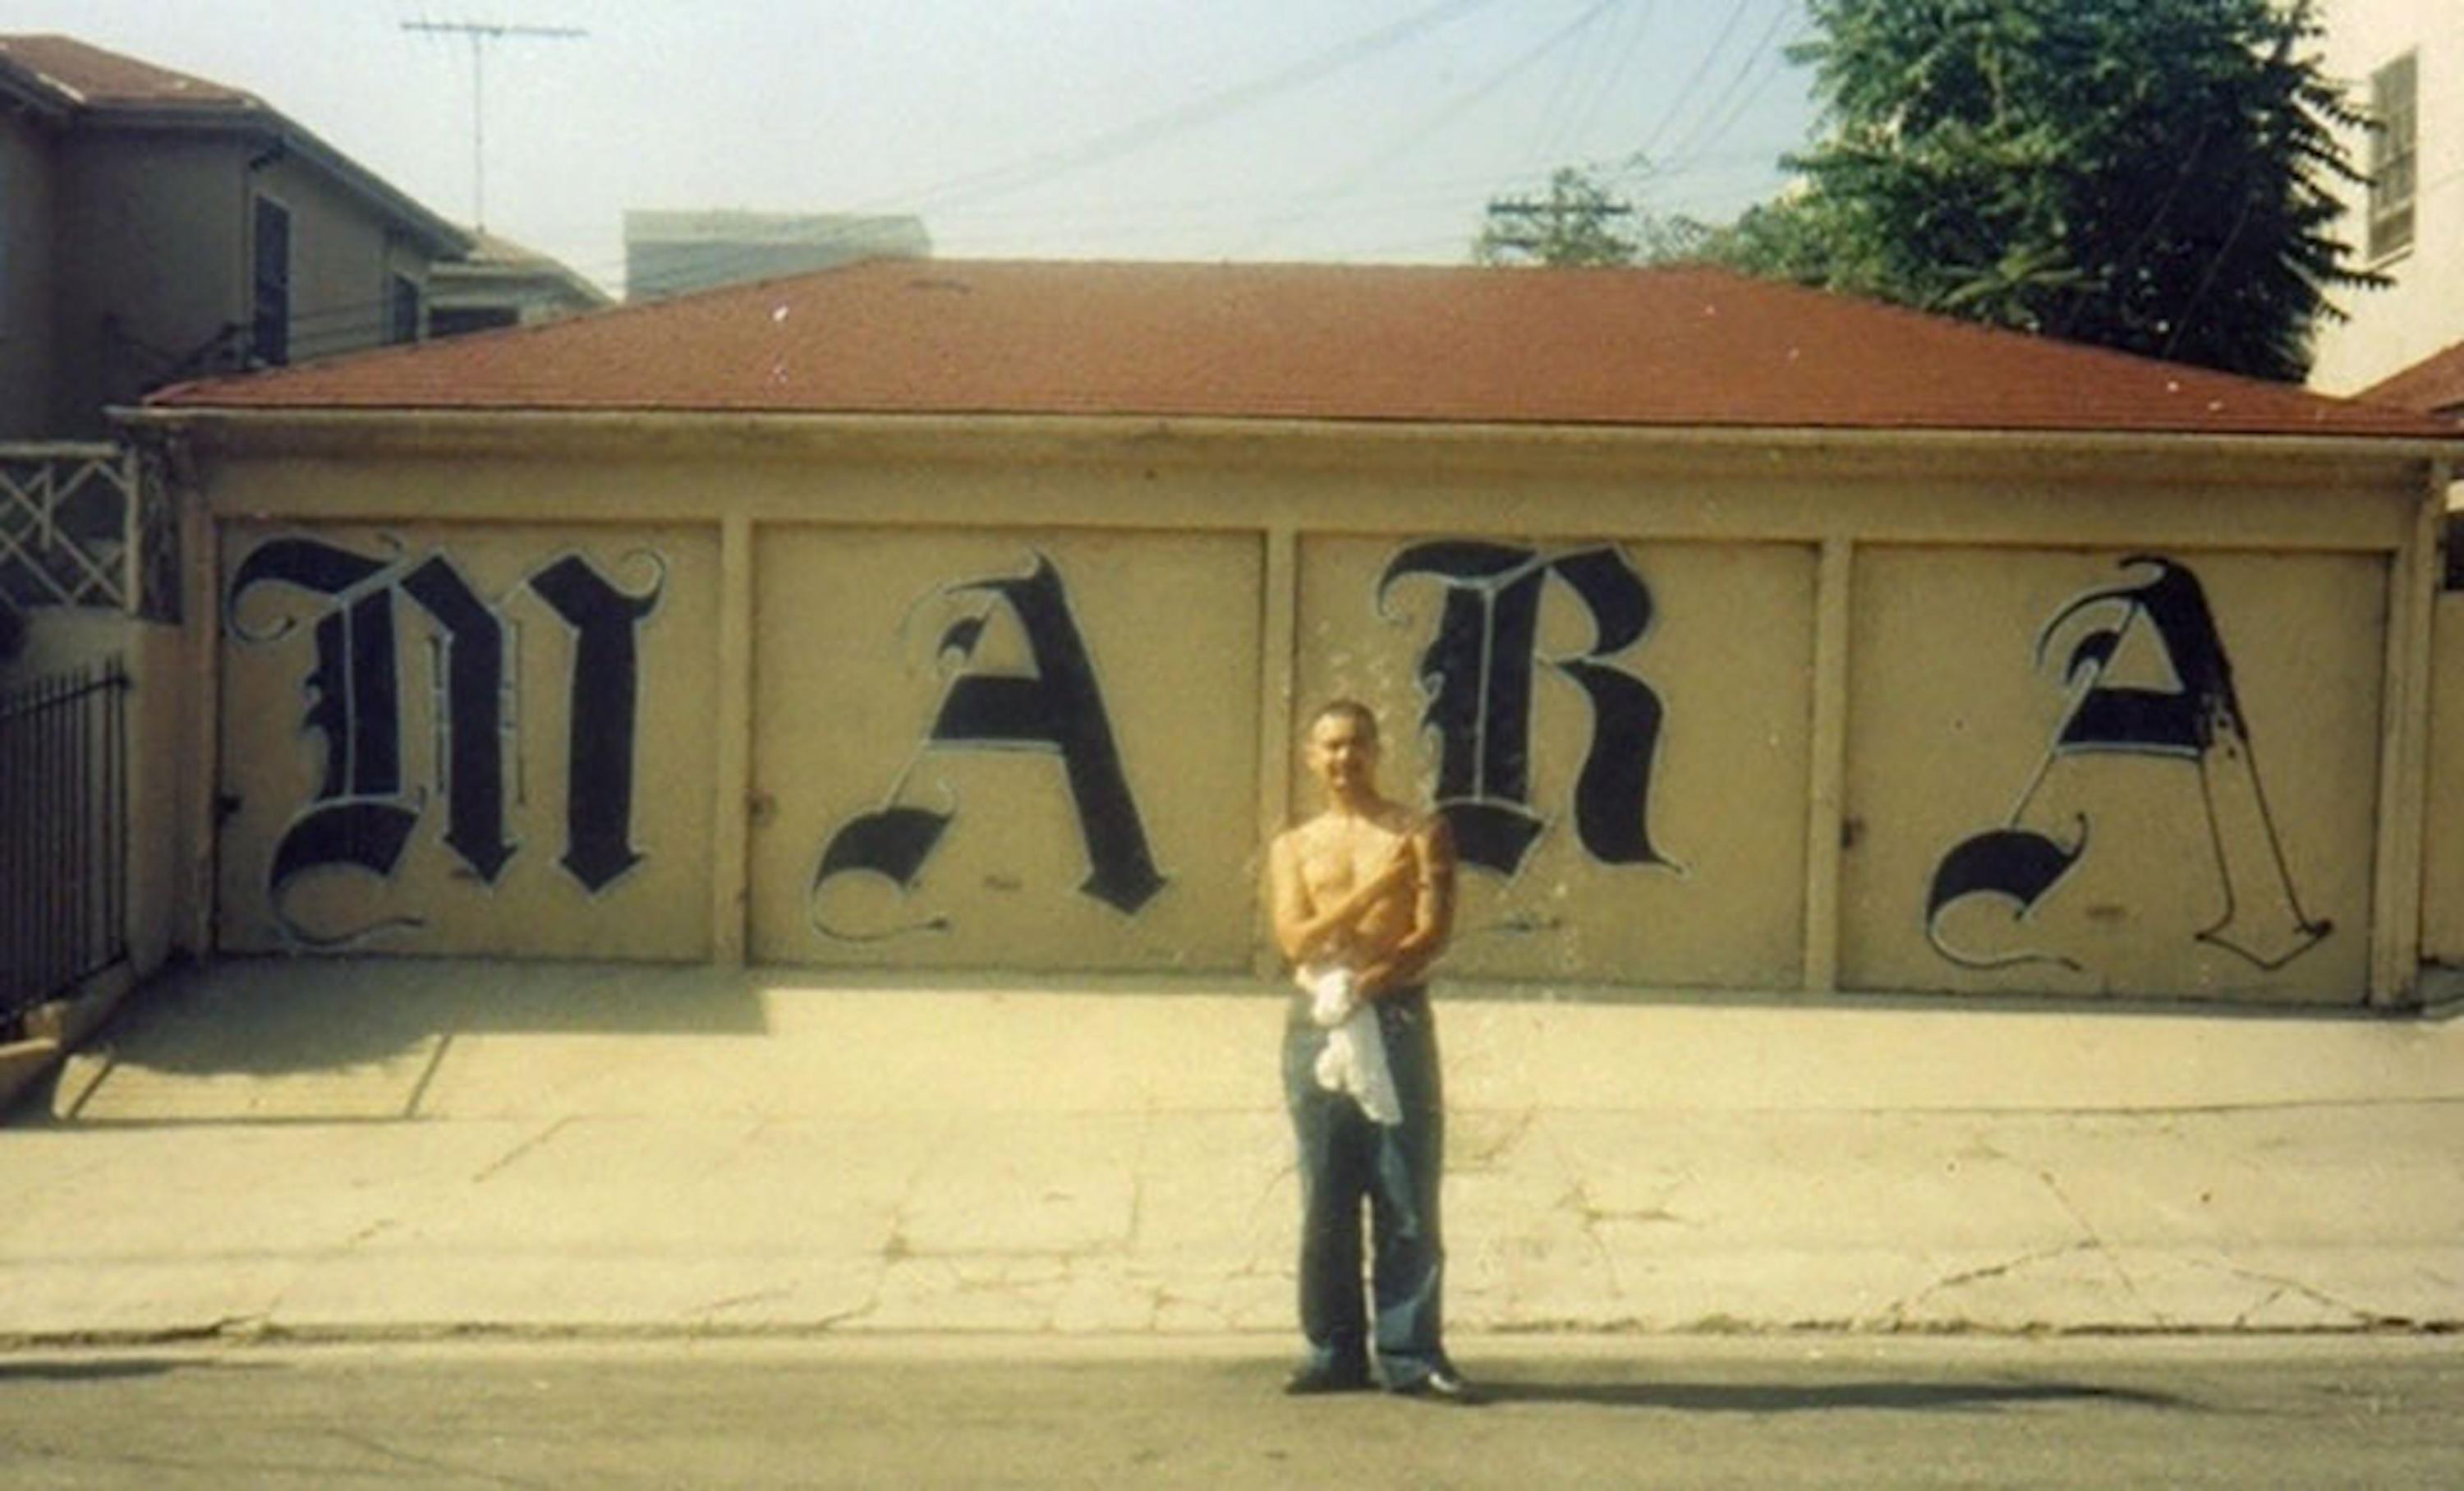 Stranger, a member of the Adams Locos clique of the Mara Salvatrucha, in front of a gang mural near Norton Street in Los Angeles. The Adams Locos, founded in the early 90s, was one of the last MS-13 cliques to emerge from Los Angeles. Photo El Faro archive